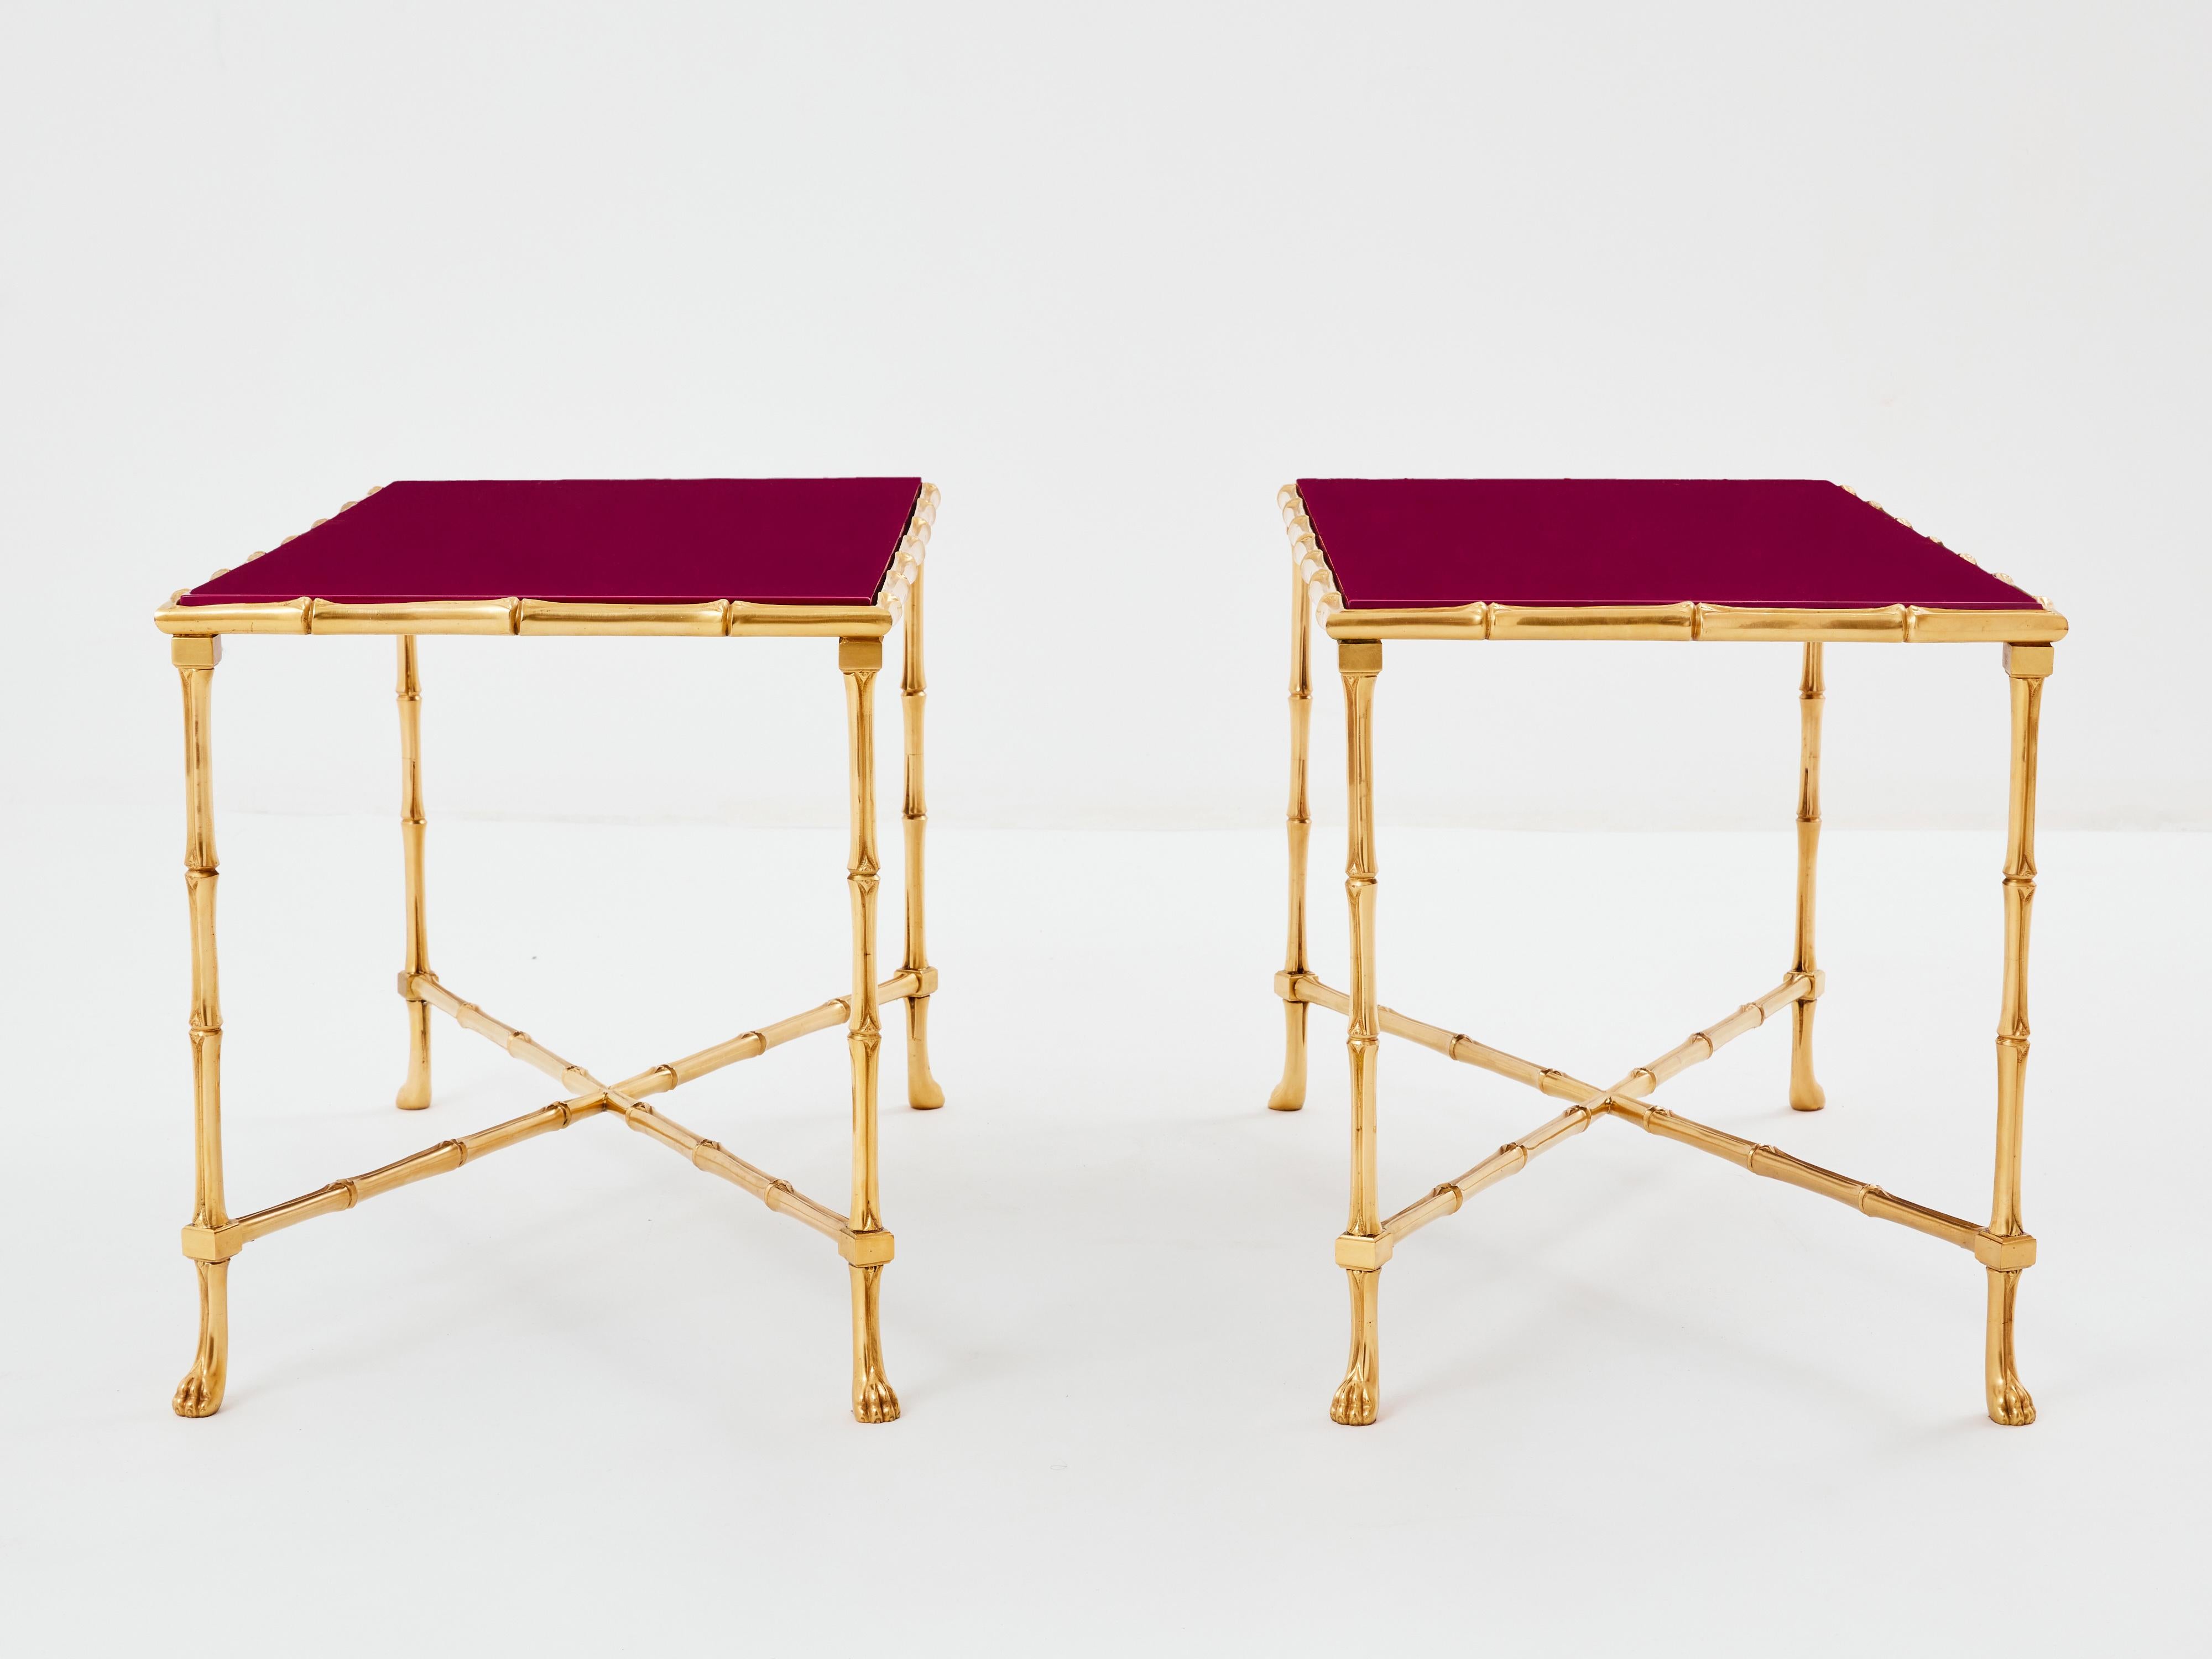 Lacquered Maison Baguès pair of bamboo brass red lacquer end tables 1960s For Sale